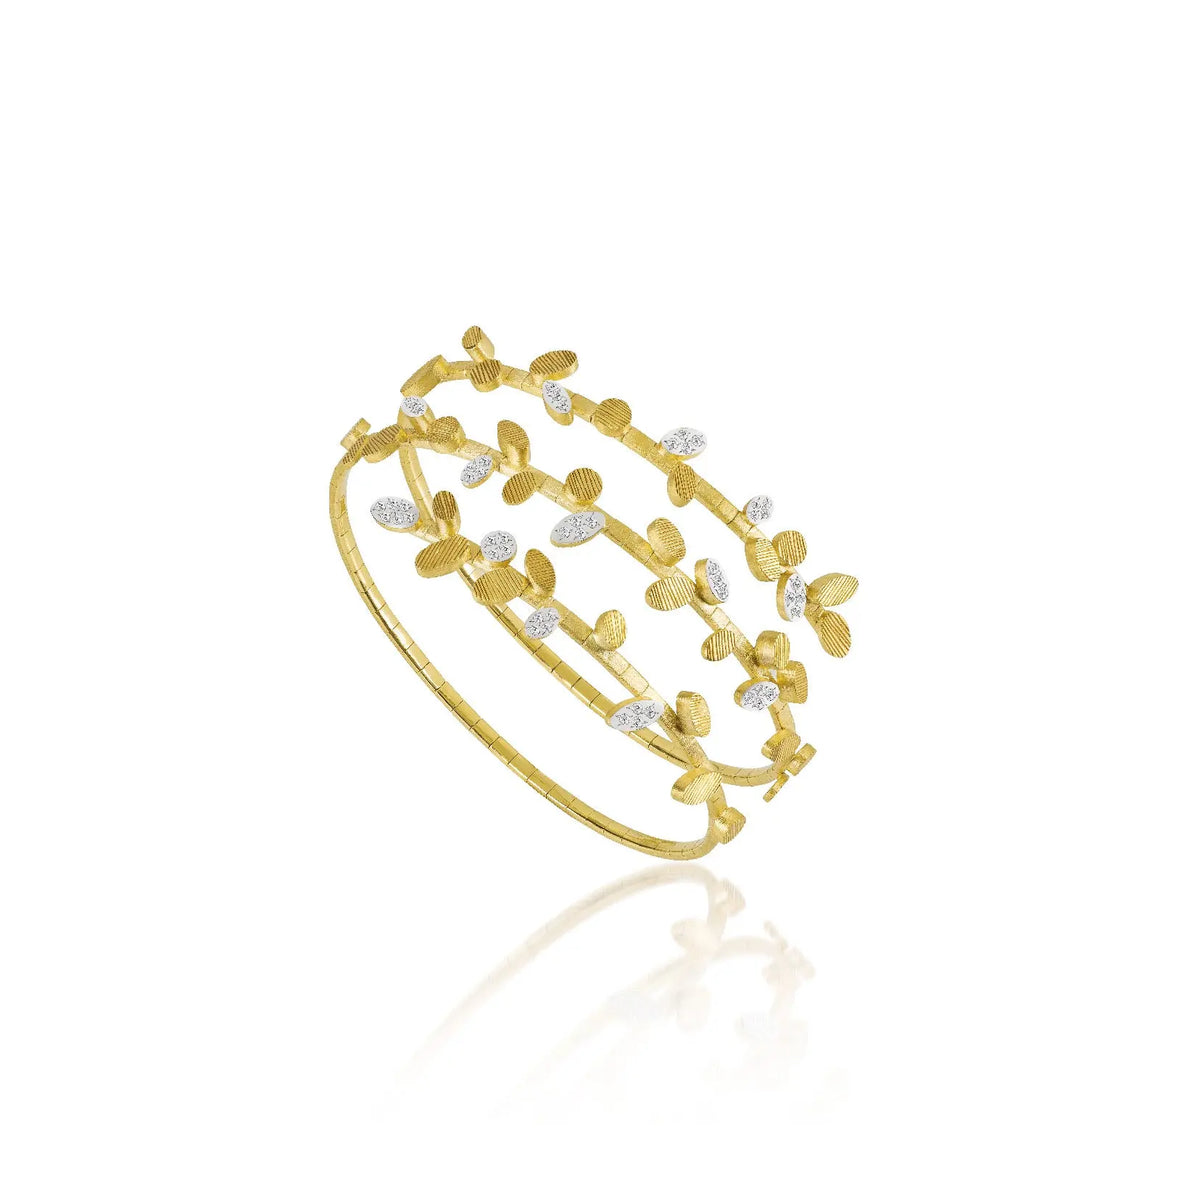 Three-band spiral bracelet in 18K yellow gold with diamonds.  Approximate width: 32,6 mm.  Approx. gold weight: 18,30 g  Diamonds: 0.29 carats round brilliant-cut VS G/H  If an item is out of stock, please allow 3-5 weeks for delivery. To check our availability please send an email to shop@sbvail.com.   Designed by Luisa Rosas and made in Portugal